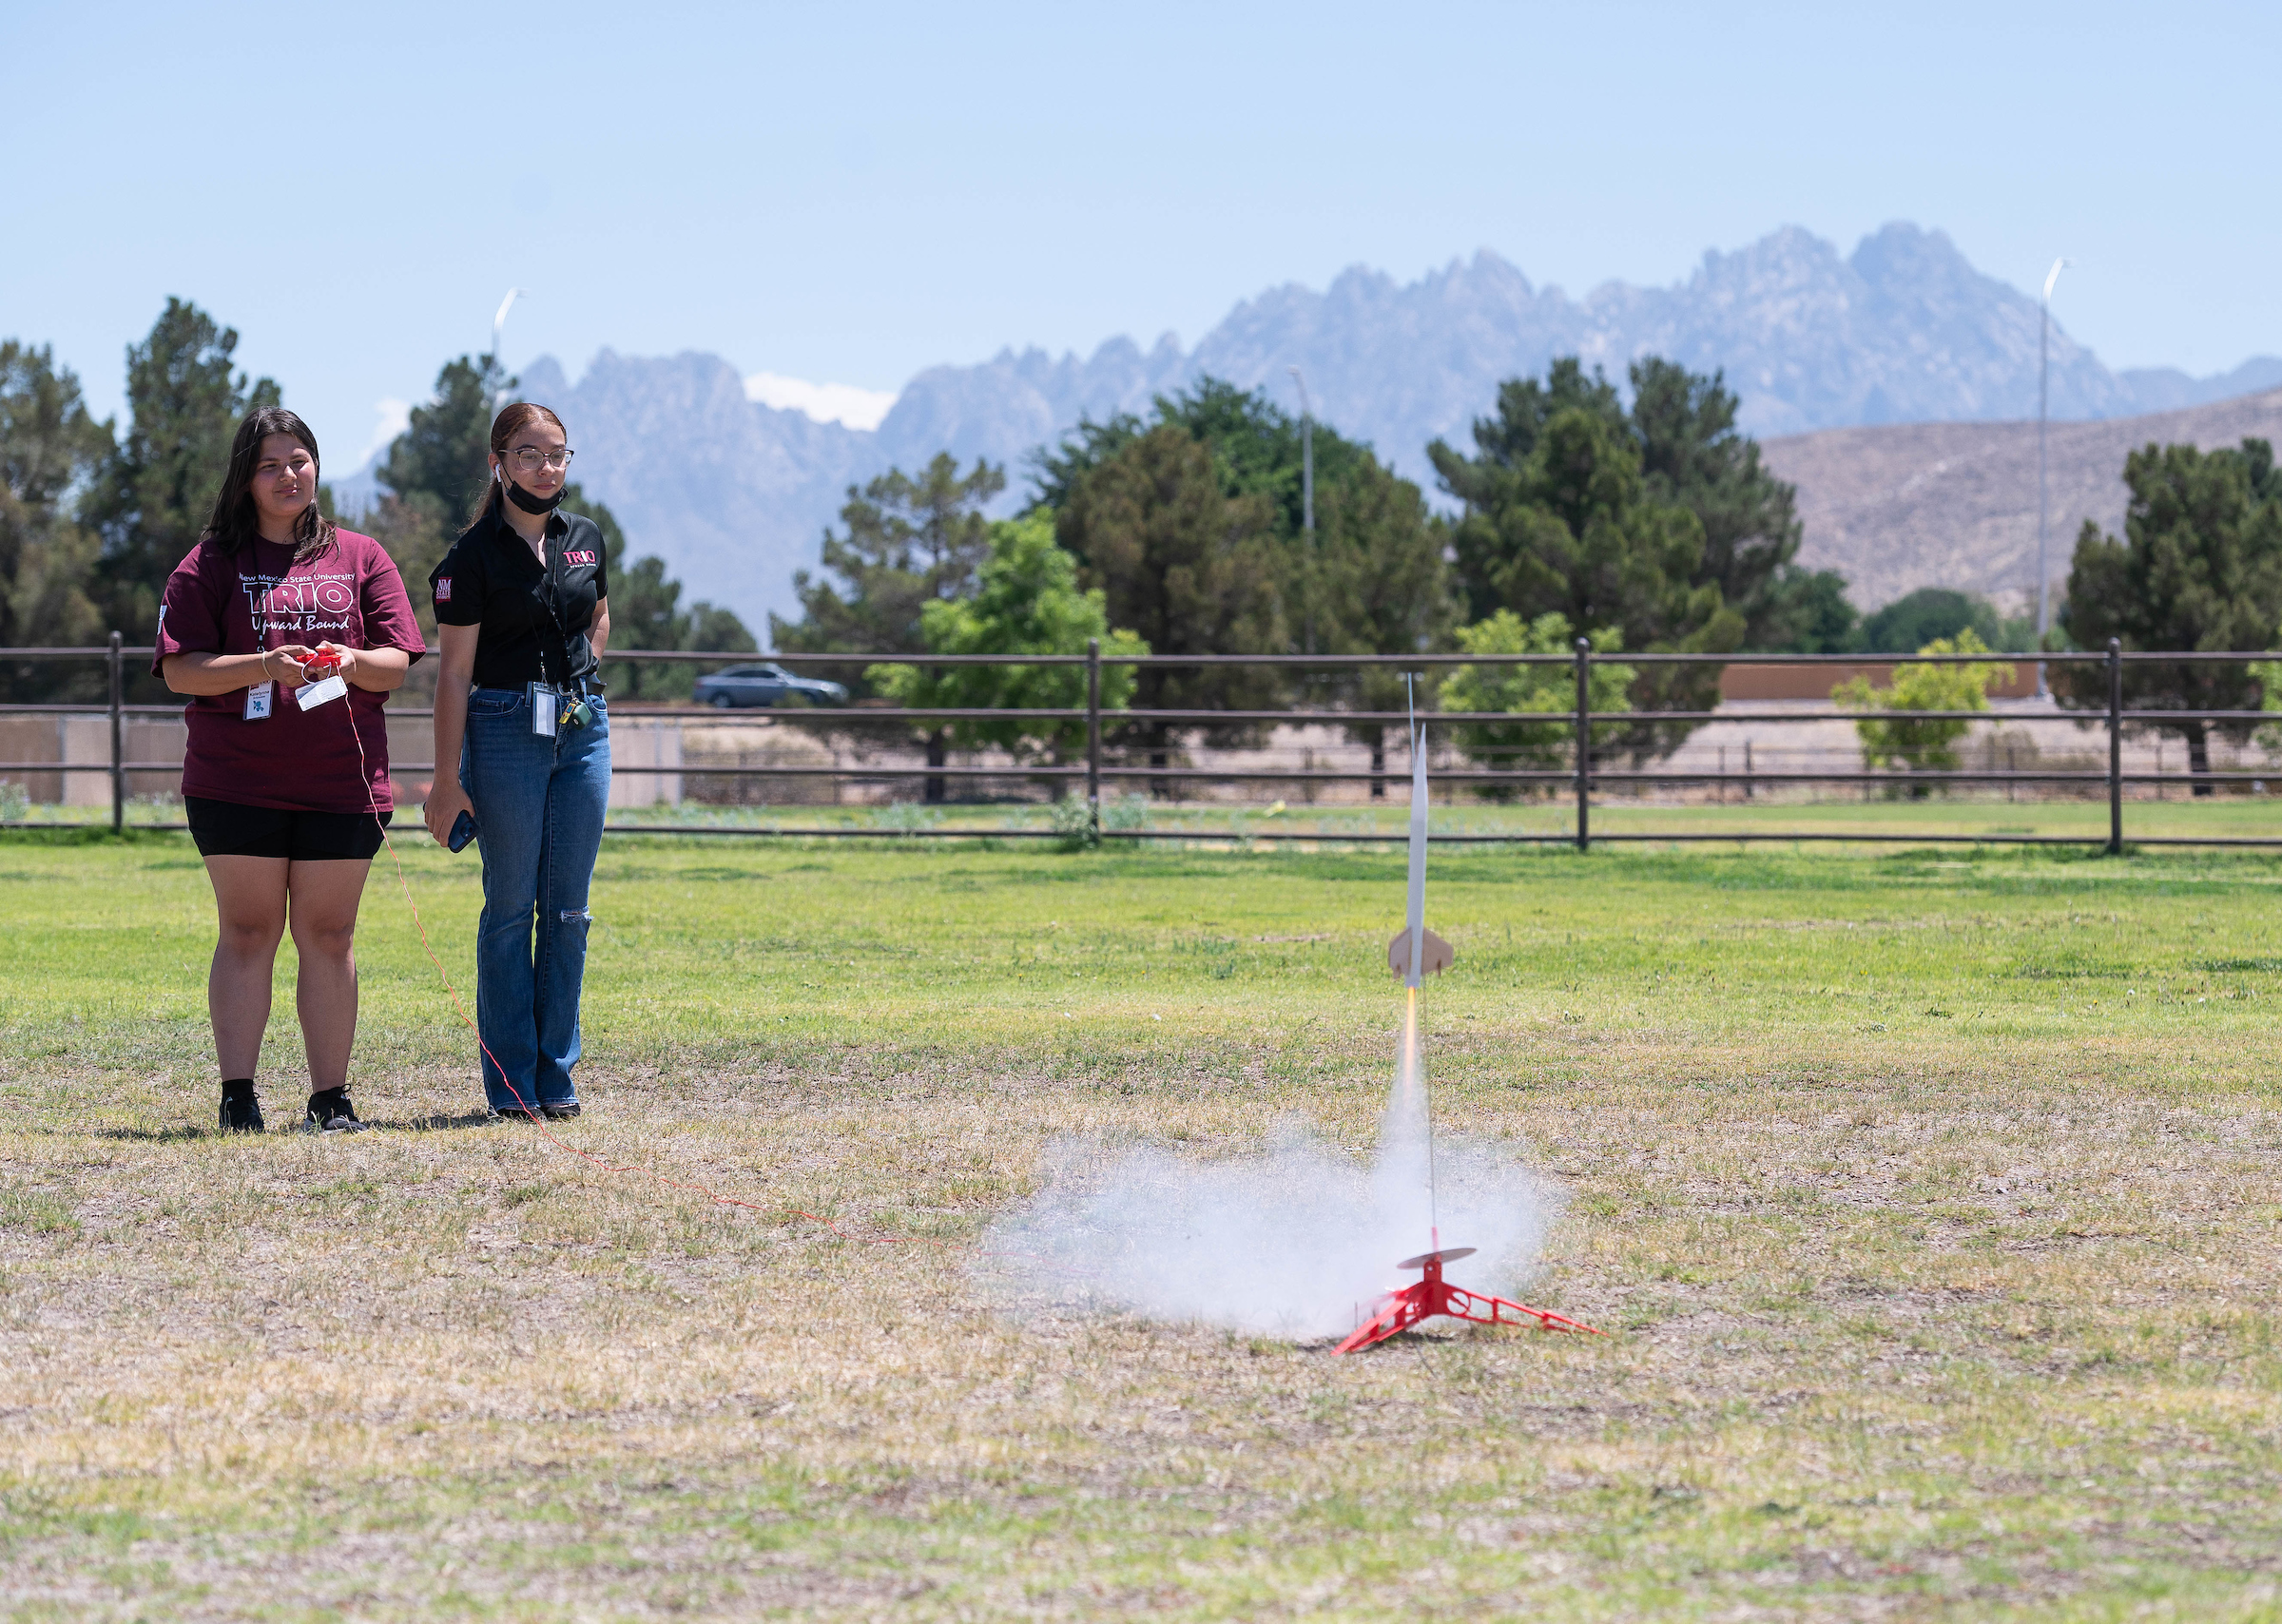 Aggie Academy Mini College program participants, Katelynne Britosalas, left, and Laila Barreras, launched rockets on the New Mexico State University Las Cruces campus as part of the 2022 Crimson Summer Institute for the TRIO Upward Bound Gadsden Independent School District/Las Cruces Public Schools Program. (NMSU photo by Josh Bachman)